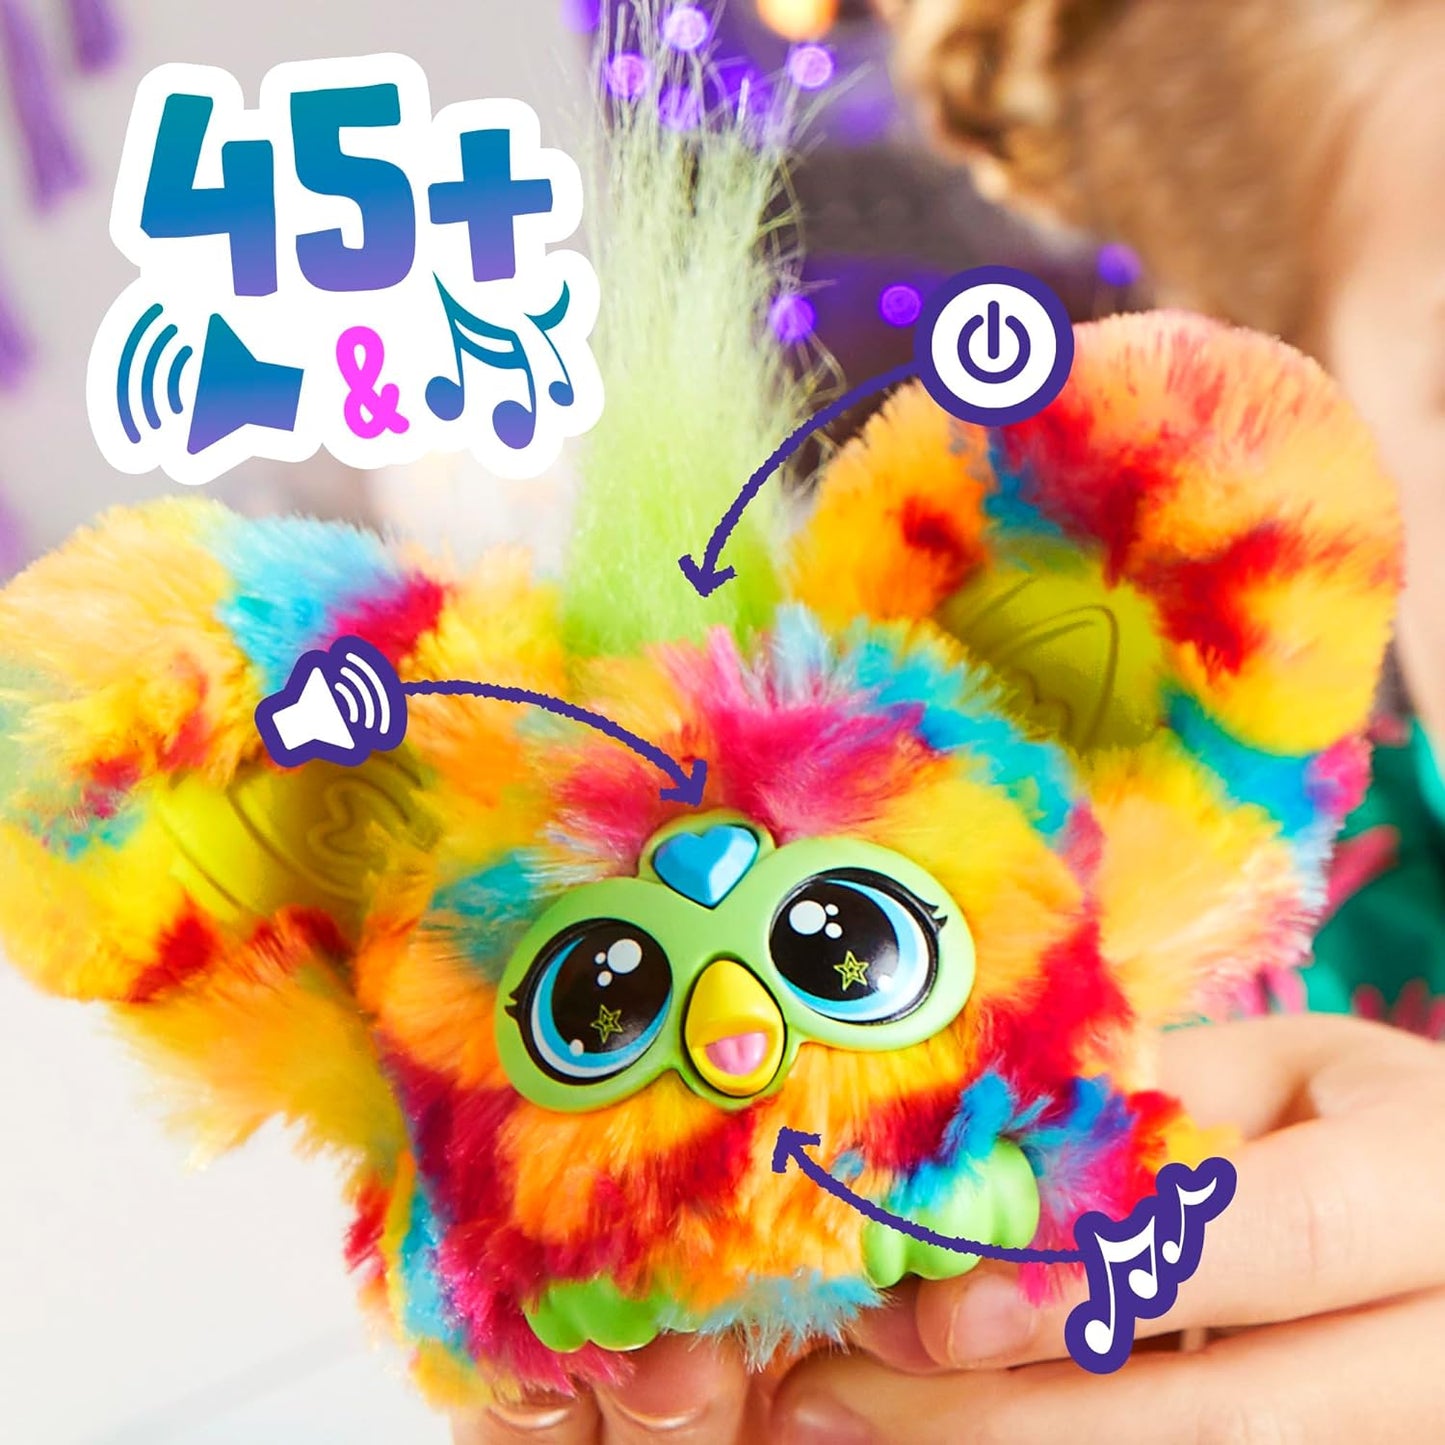 Furby Furblets Pix-Elle Mini Friend, 45+ Sounds, Gamer Music & Furbish Phrases, Electronic Plush Toys for Girls & Boys 6 Years & Up, Multicolor